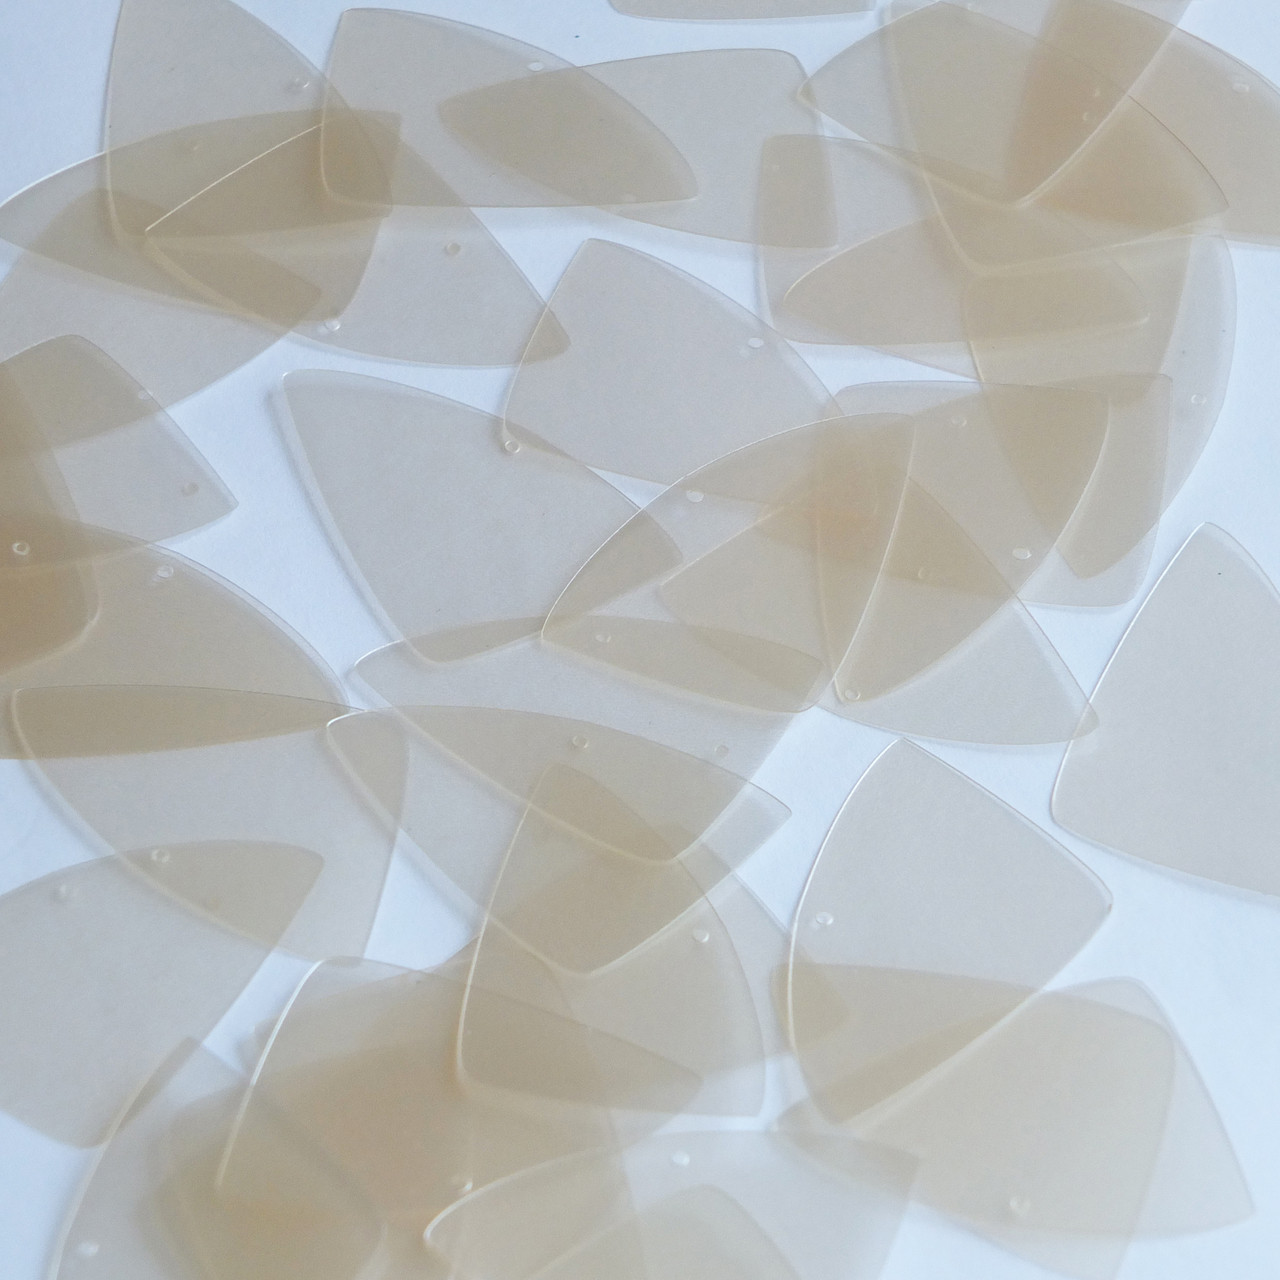 Fishscale Fin Sequin 1.5" Ivory Cream Transparent Satin and Matte Duo Two Sided